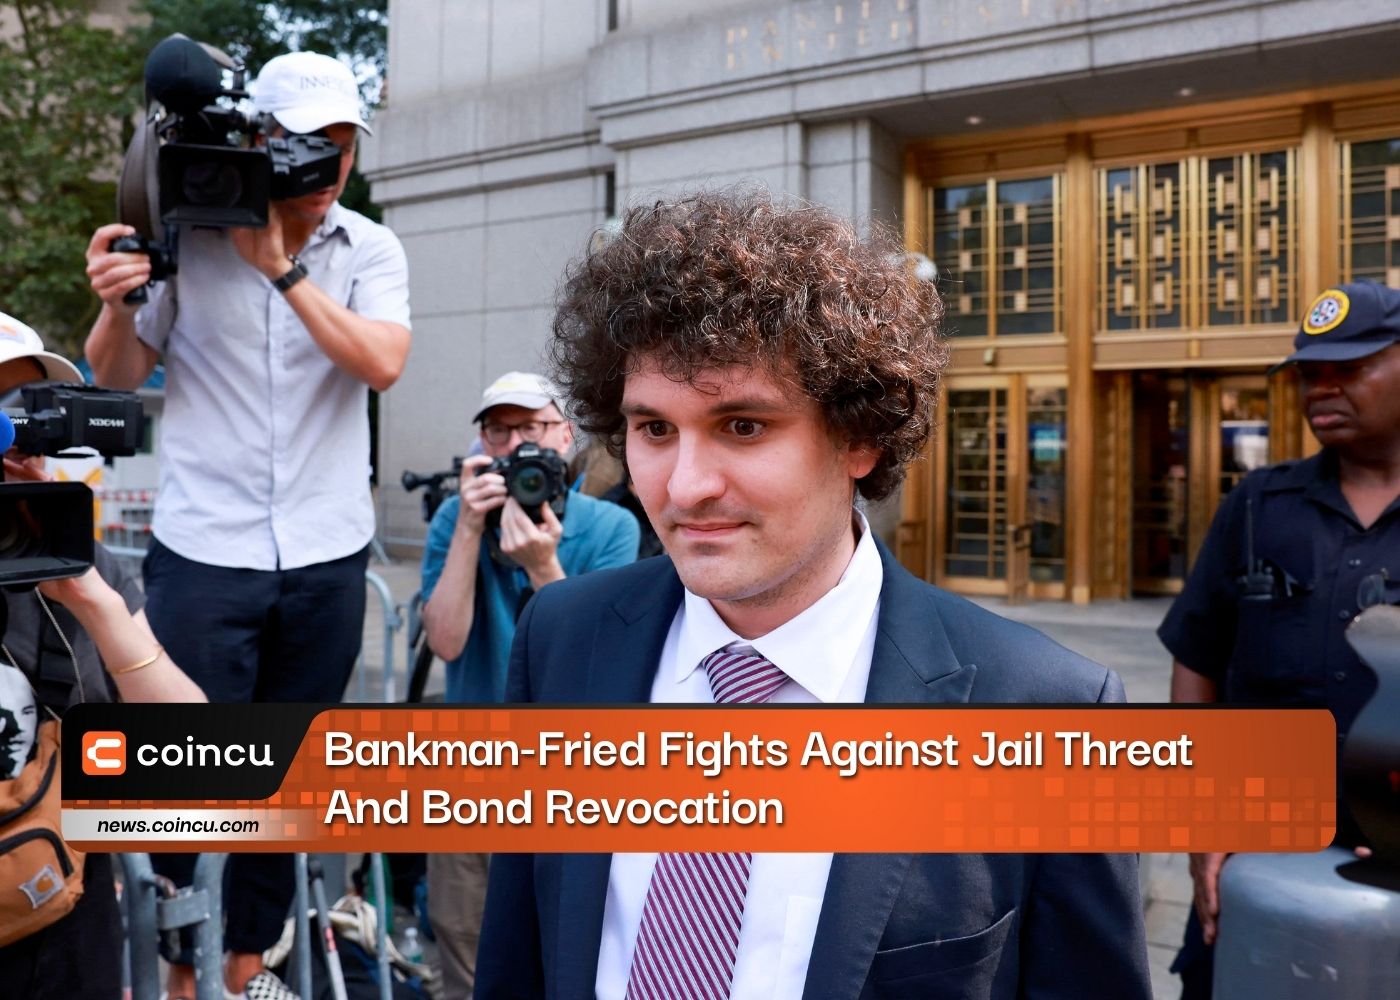 Bankman-Fried Fights Against Jail Threat And Bond Revocation